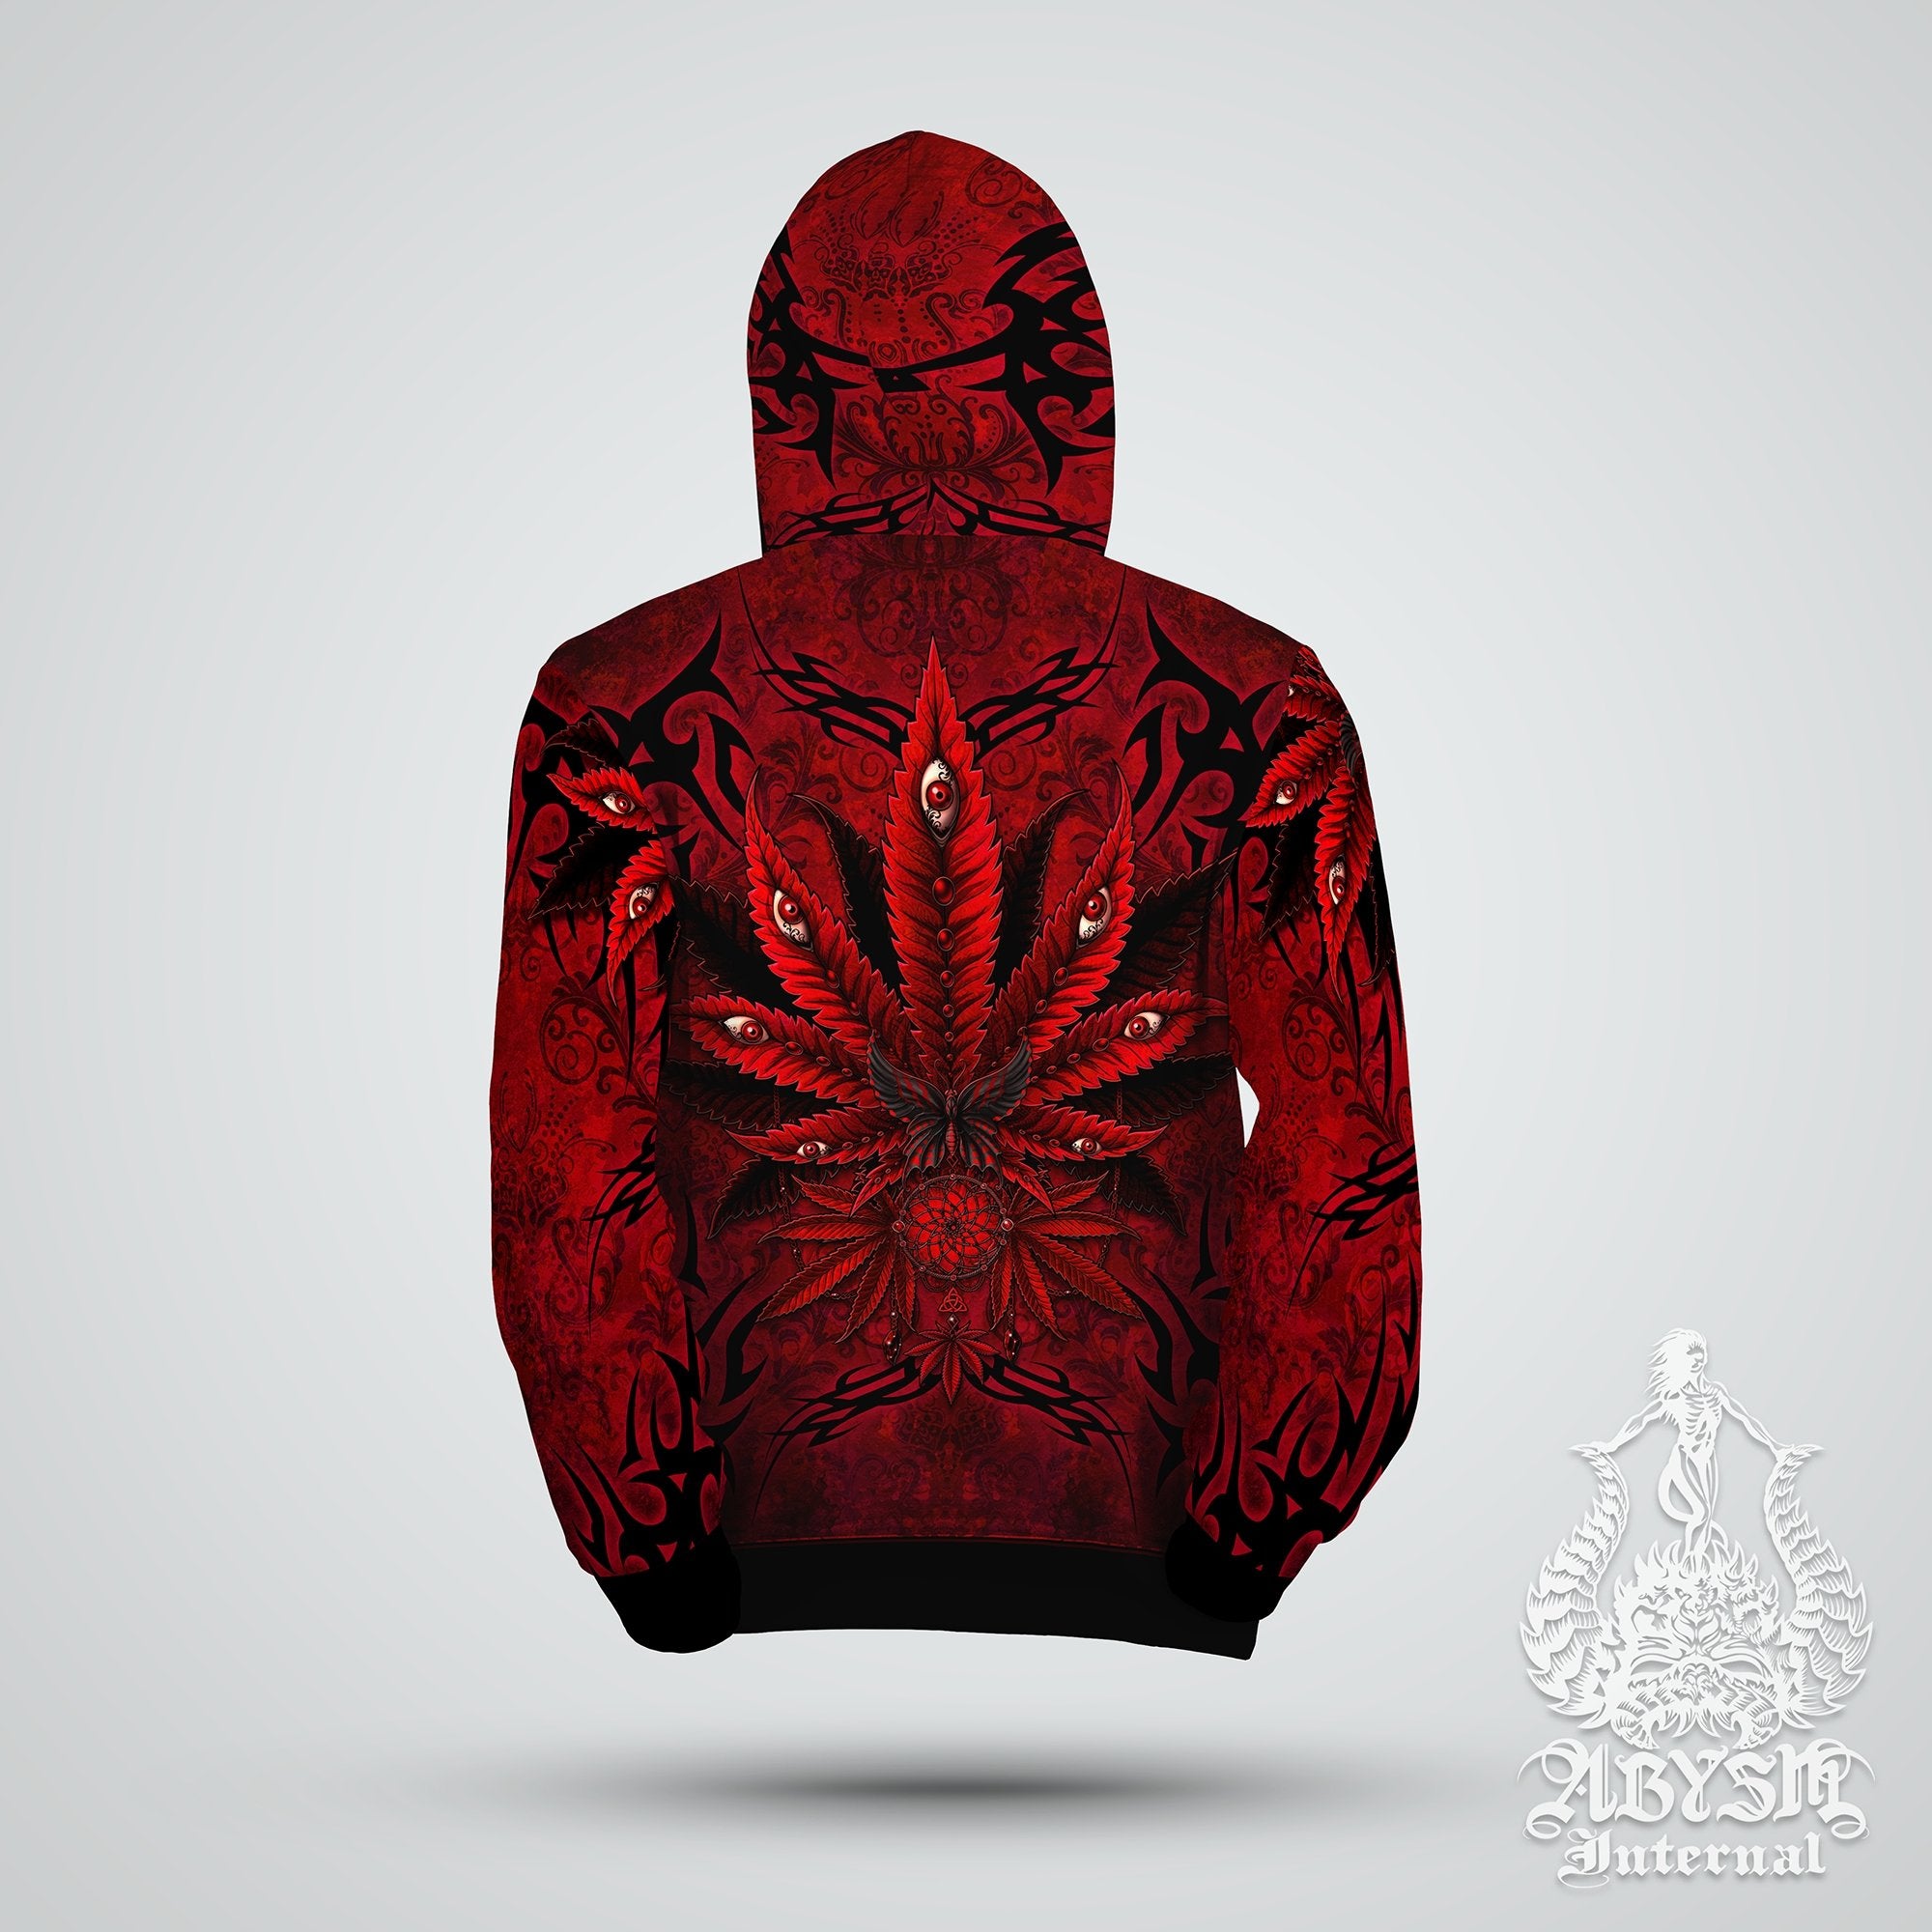 Weed Hoodie, Cannabis Concert Sweater, Gothic Festival Outfit, Goth Streetwear, Alternative Clothing, Unisex, 420 Gift - Bloody Red Marijuana - Abysm Internal